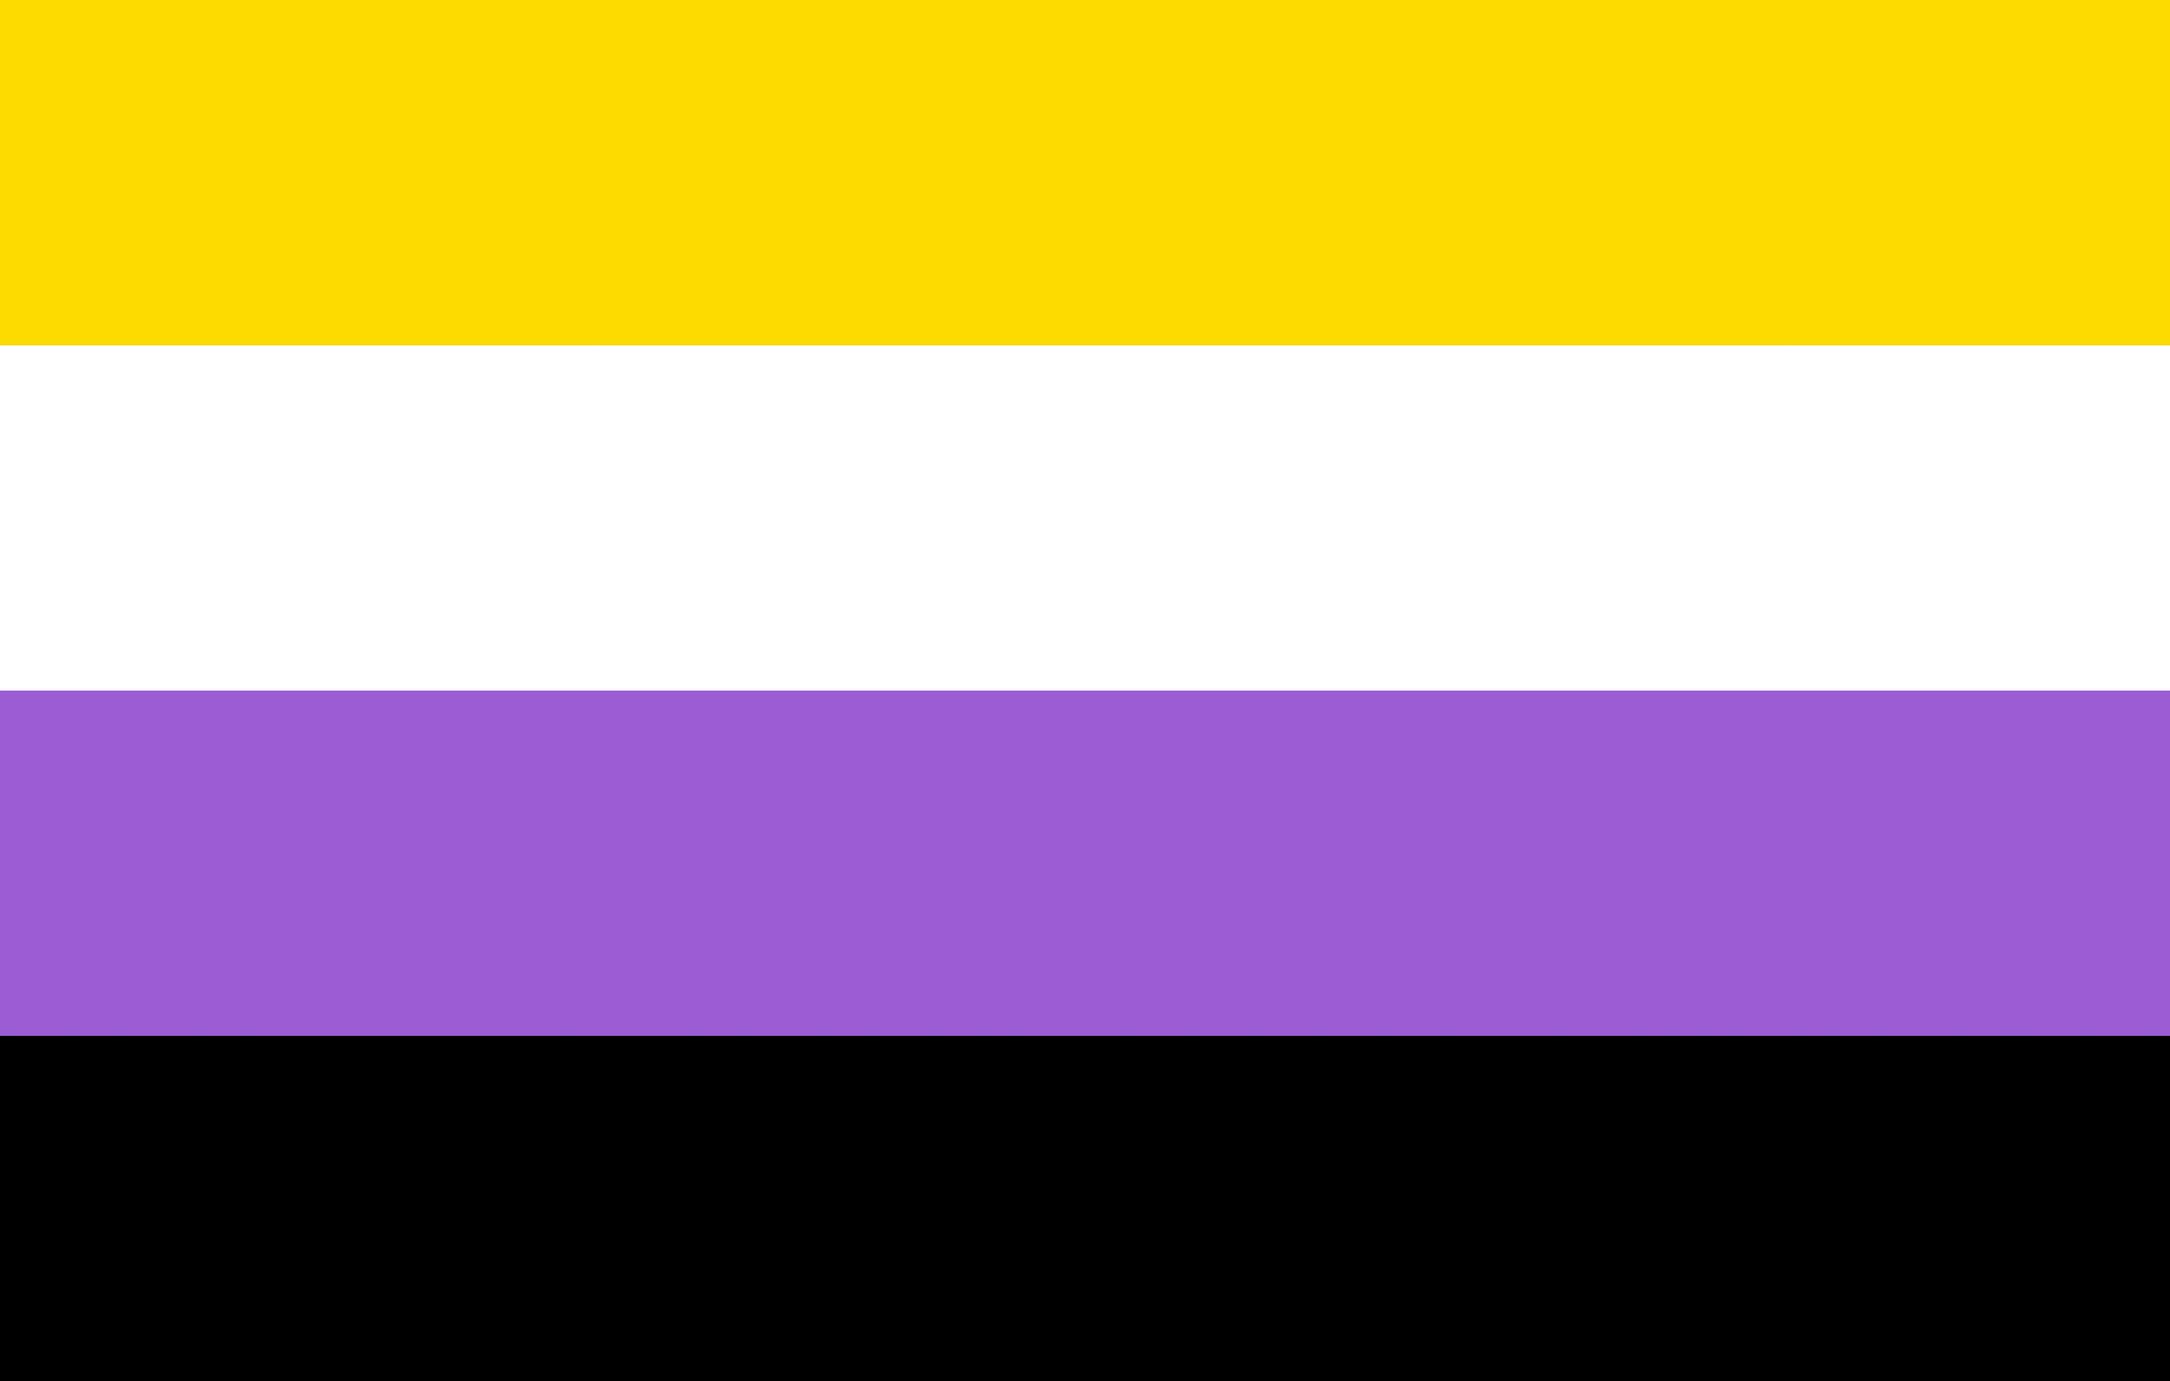 Find out what these 9 LGBTQ+ pride flags mean